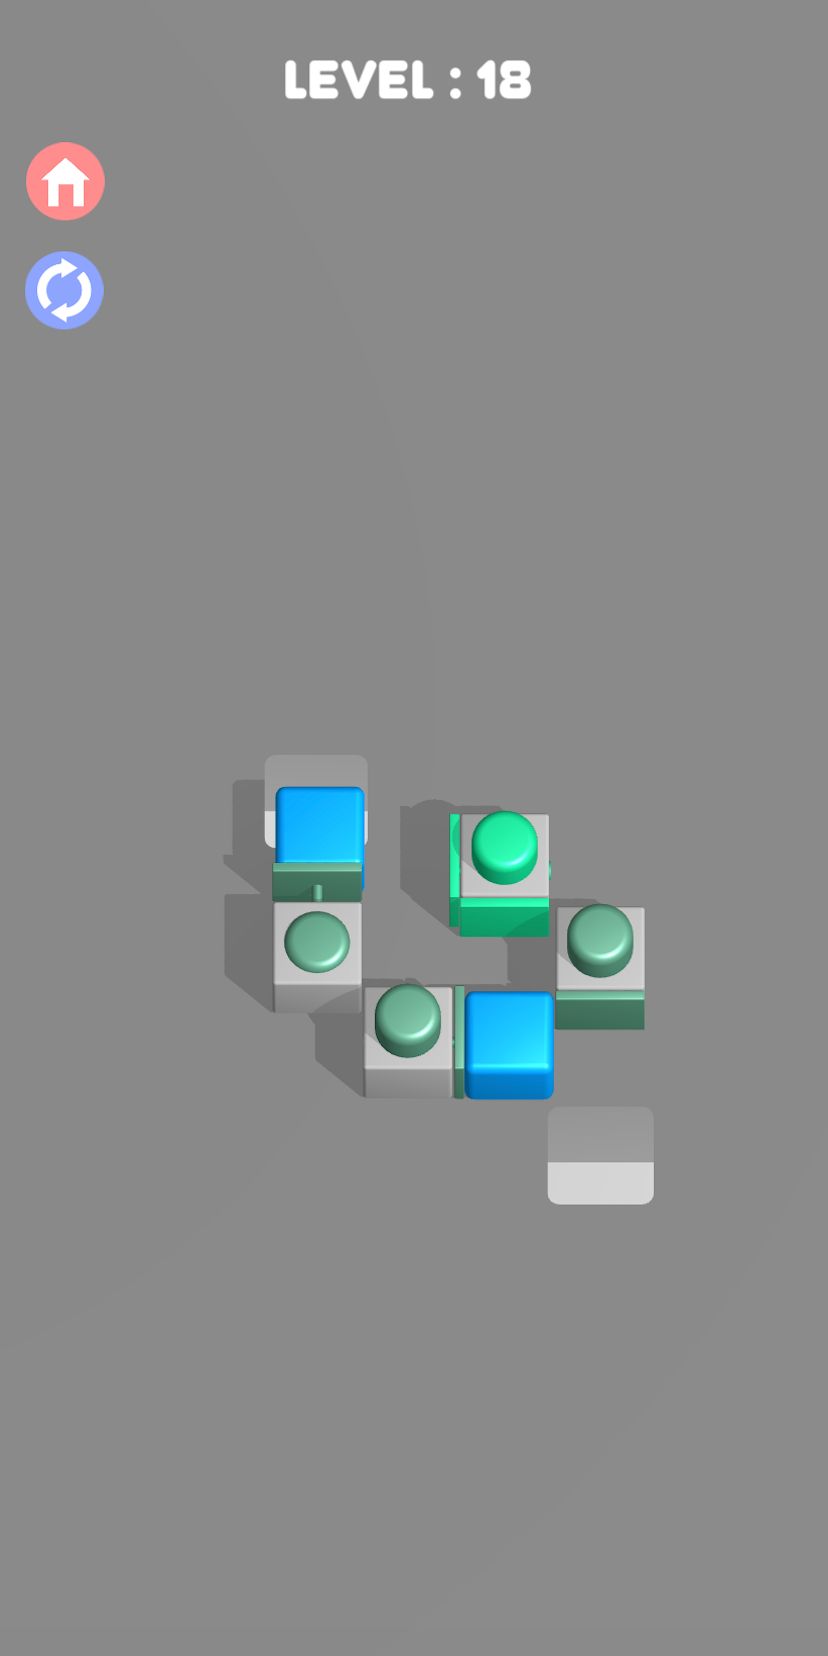 Push them all 3D - Smart block puzzle game for Android